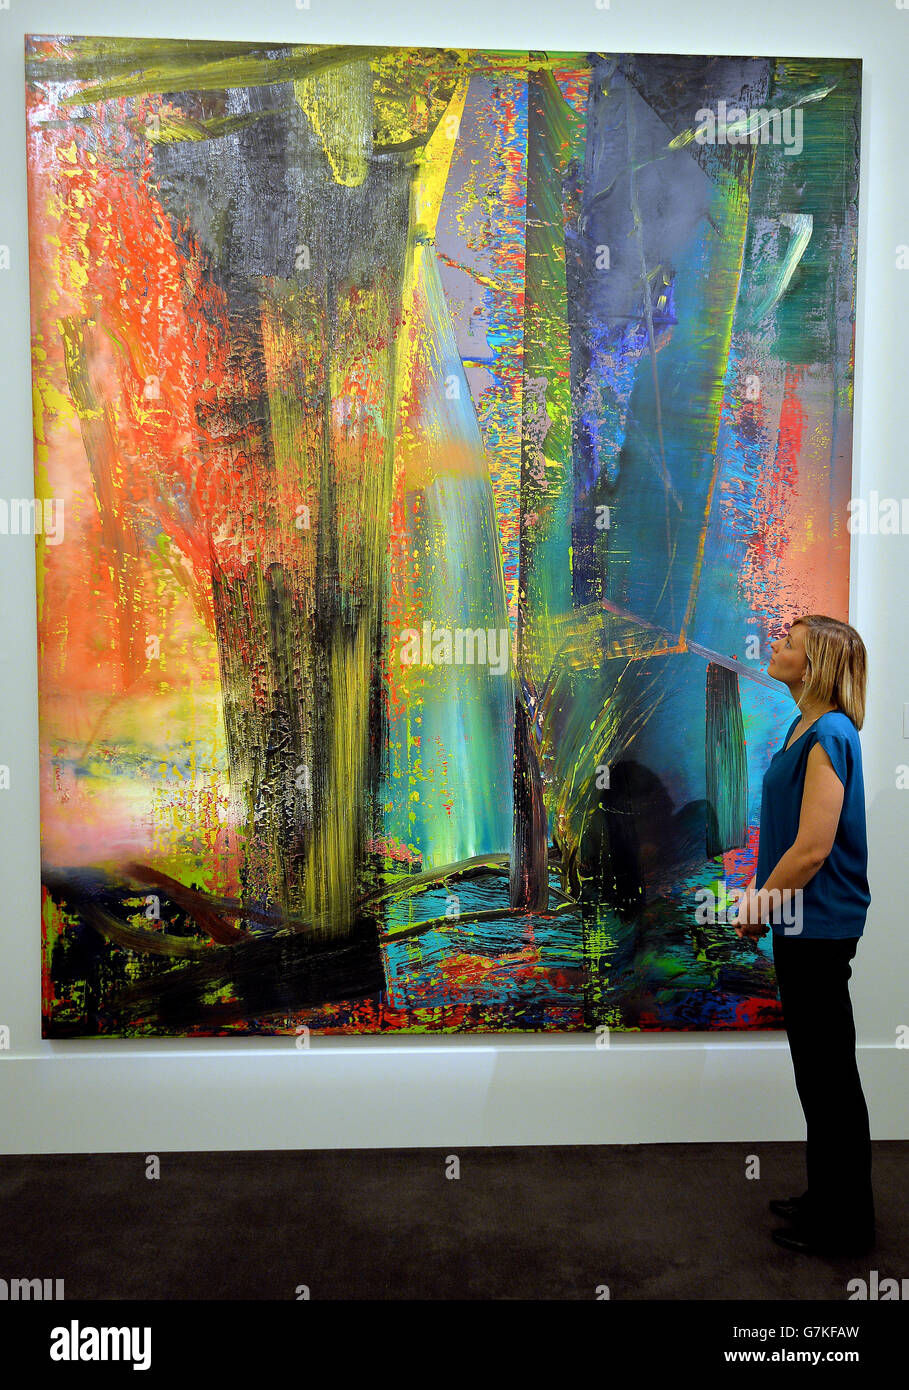 A young woman studies the Gerhard Richter painting Abstraktes Bild, which is estimated to be sold for between £14-20 million during the Impressionist and Modern auction at Sotheby's on 3rd February, on display at their showrooms in central London. Stock Photo